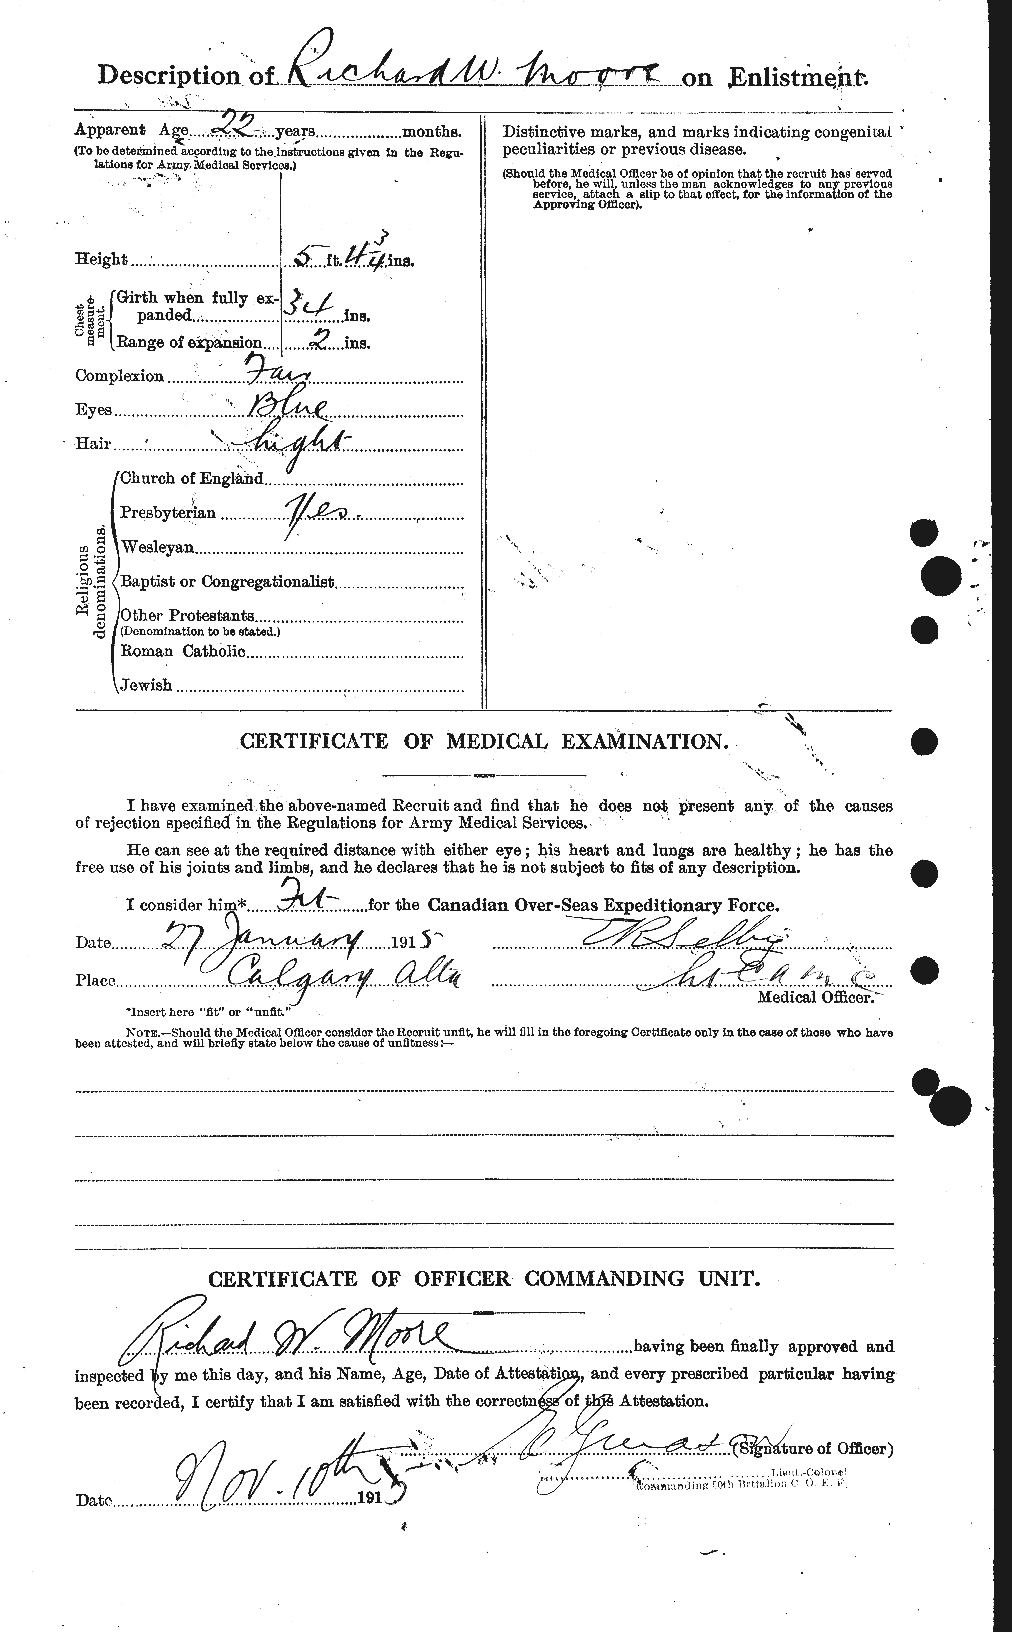 Personnel Records of the First World War - CEF 503542b